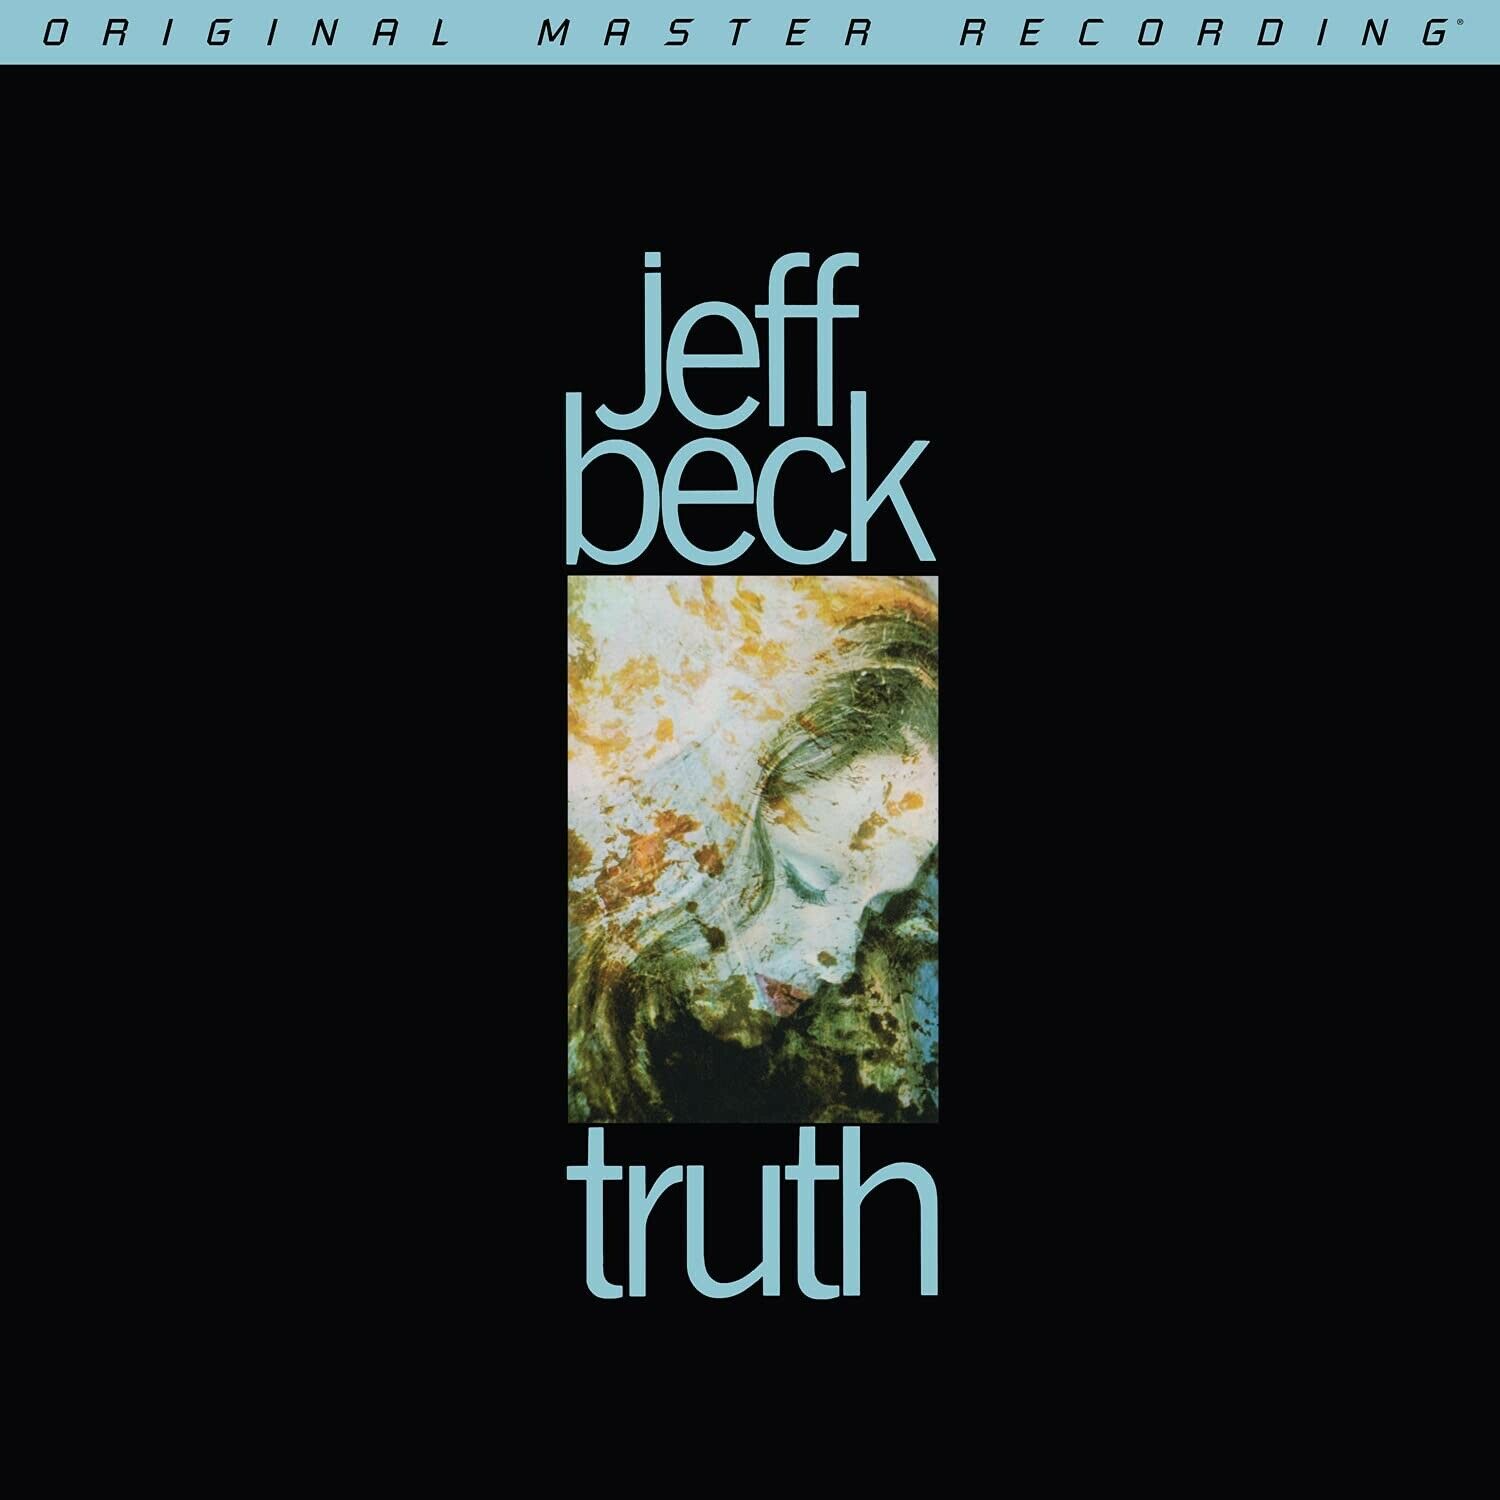 Jeff Beck – Truth (1968) [MFSL 2021] SACD ISO + DSF DSD64 + Hi-Res FLAC